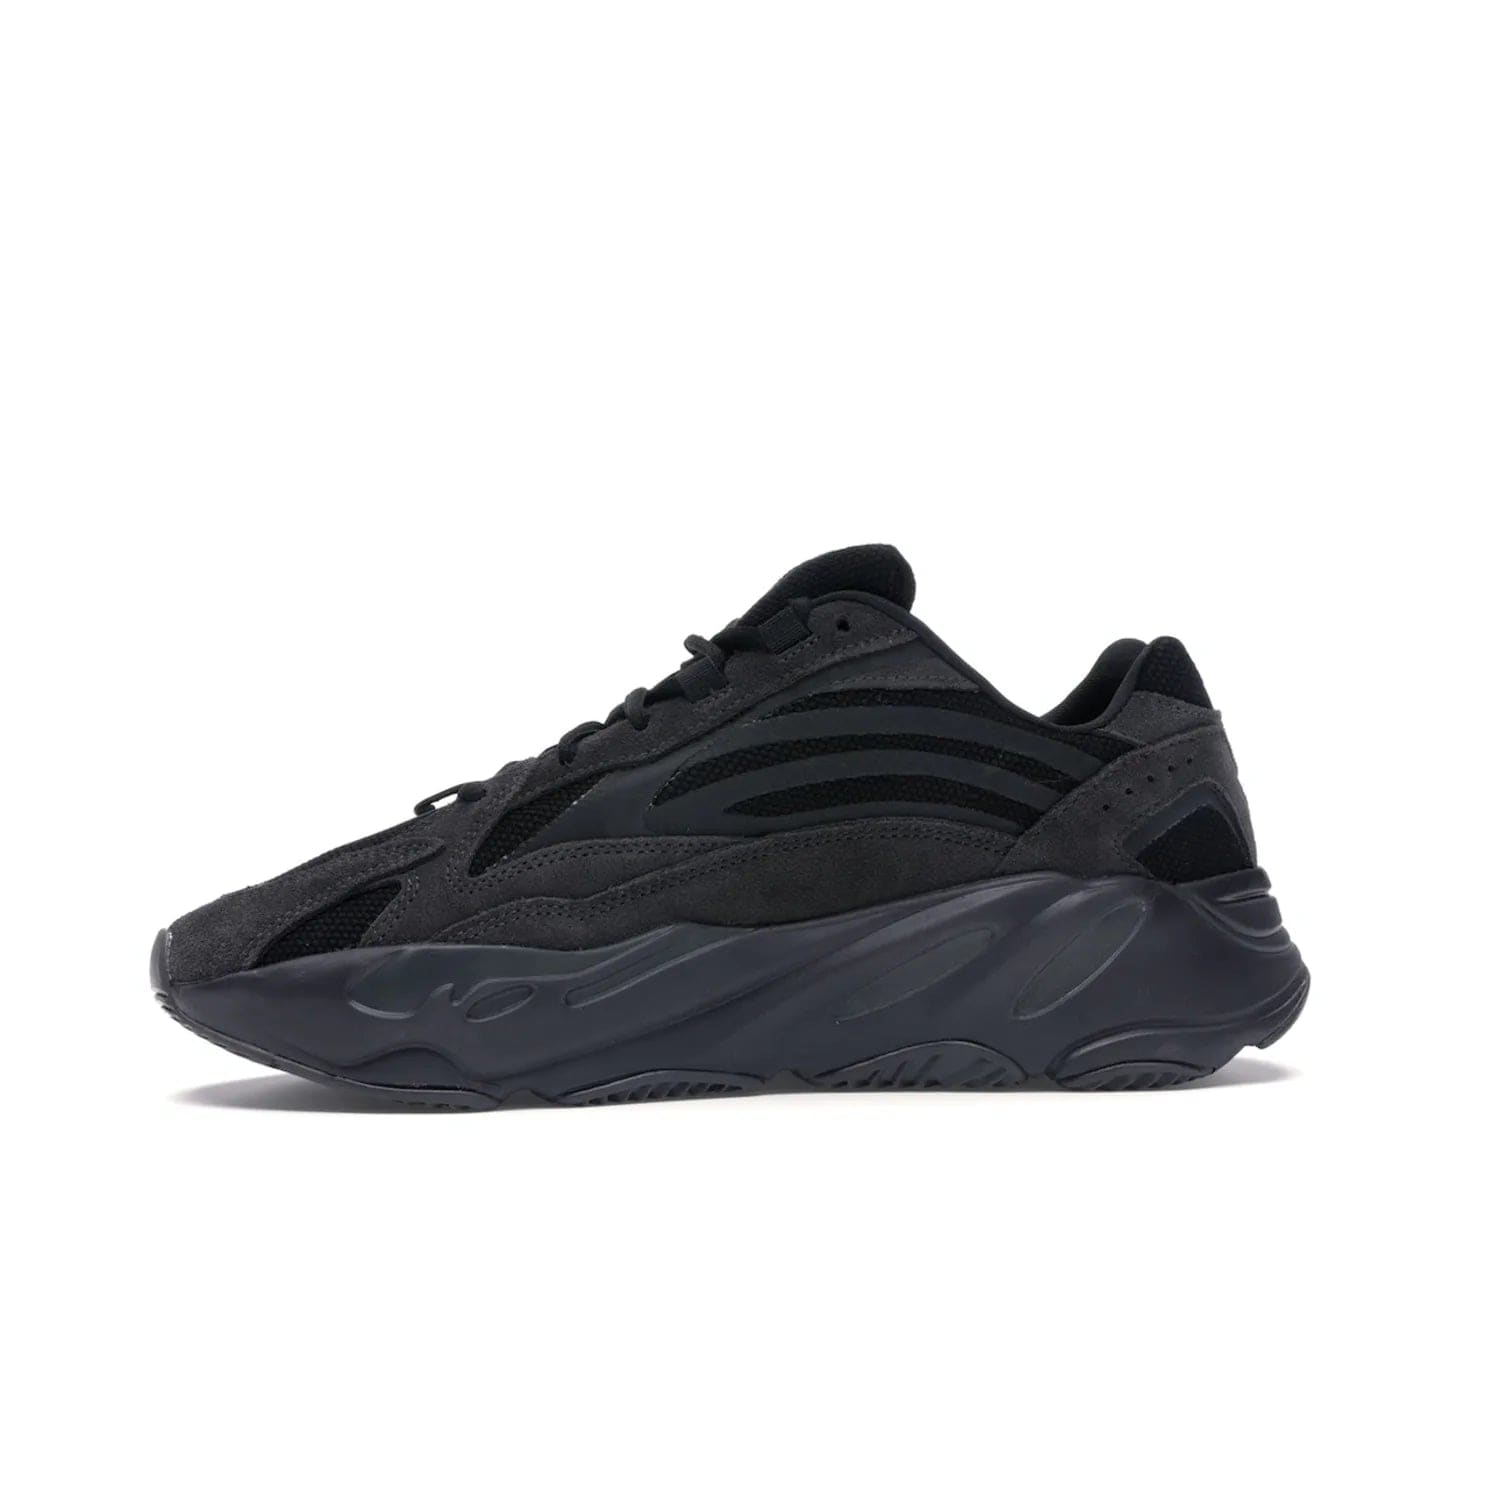 adidas Yeezy Boost 700 V2 Vanta - Image 18 - Only at www.BallersClubKickz.com - Introducing the adidas Yeezy Boost 700 V2 Vanta - a sleek and stylish all-black design featuring a combination of mesh, leather, and suede construction with signature Boost cushioning in the sole. The ultimate in comfort and support.